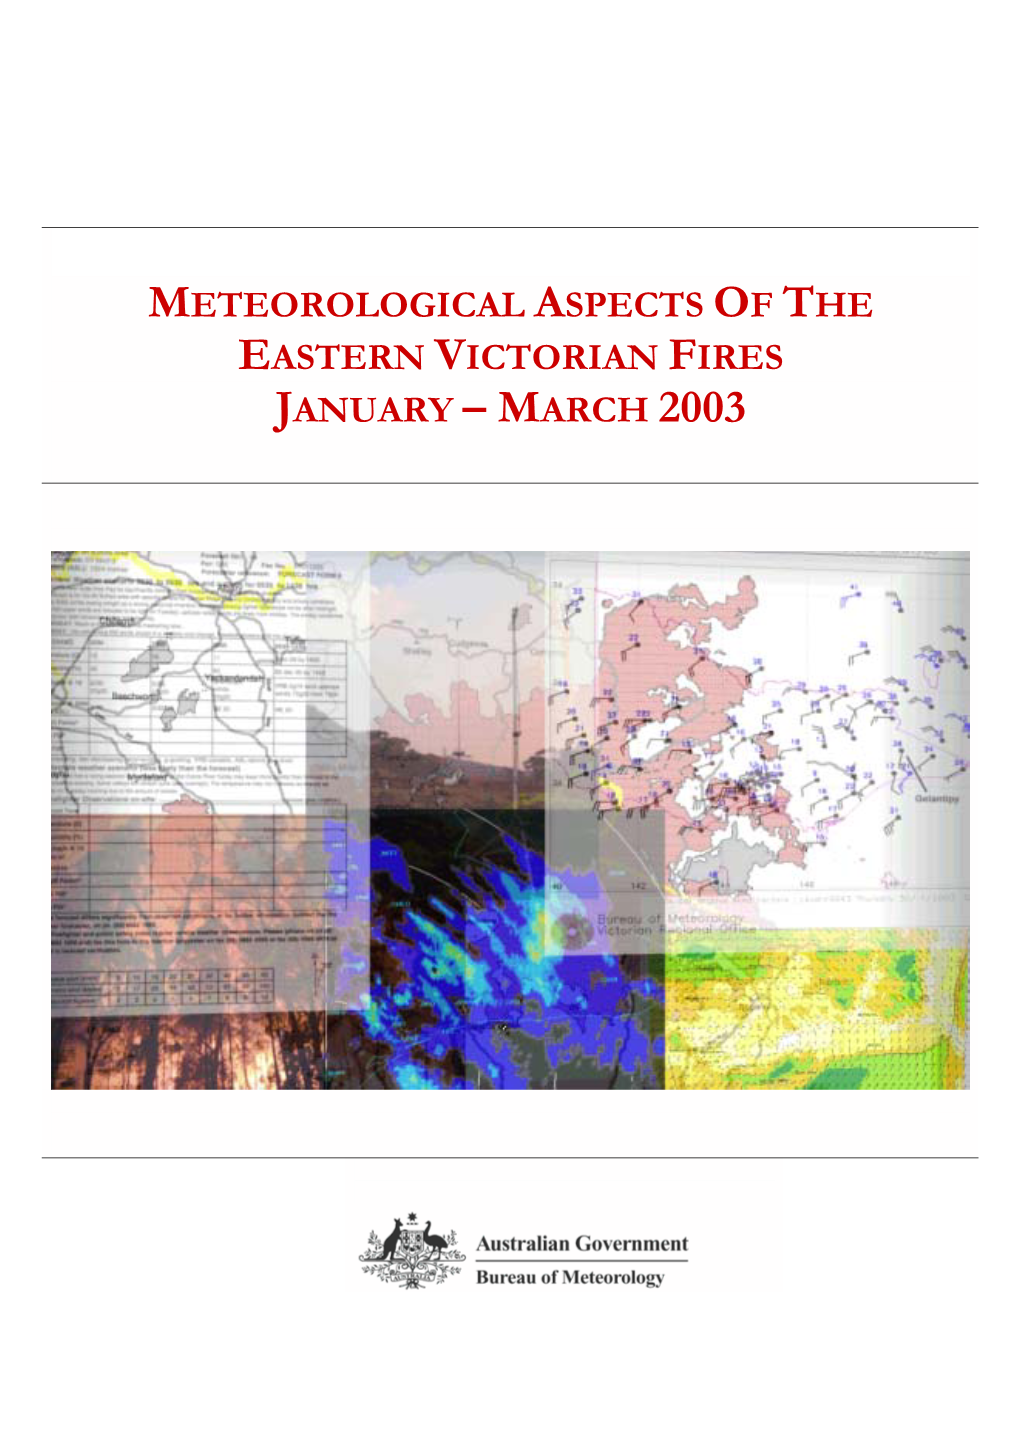 Meteorological Aspects of the Eastern Victorian Fires January – March 2003